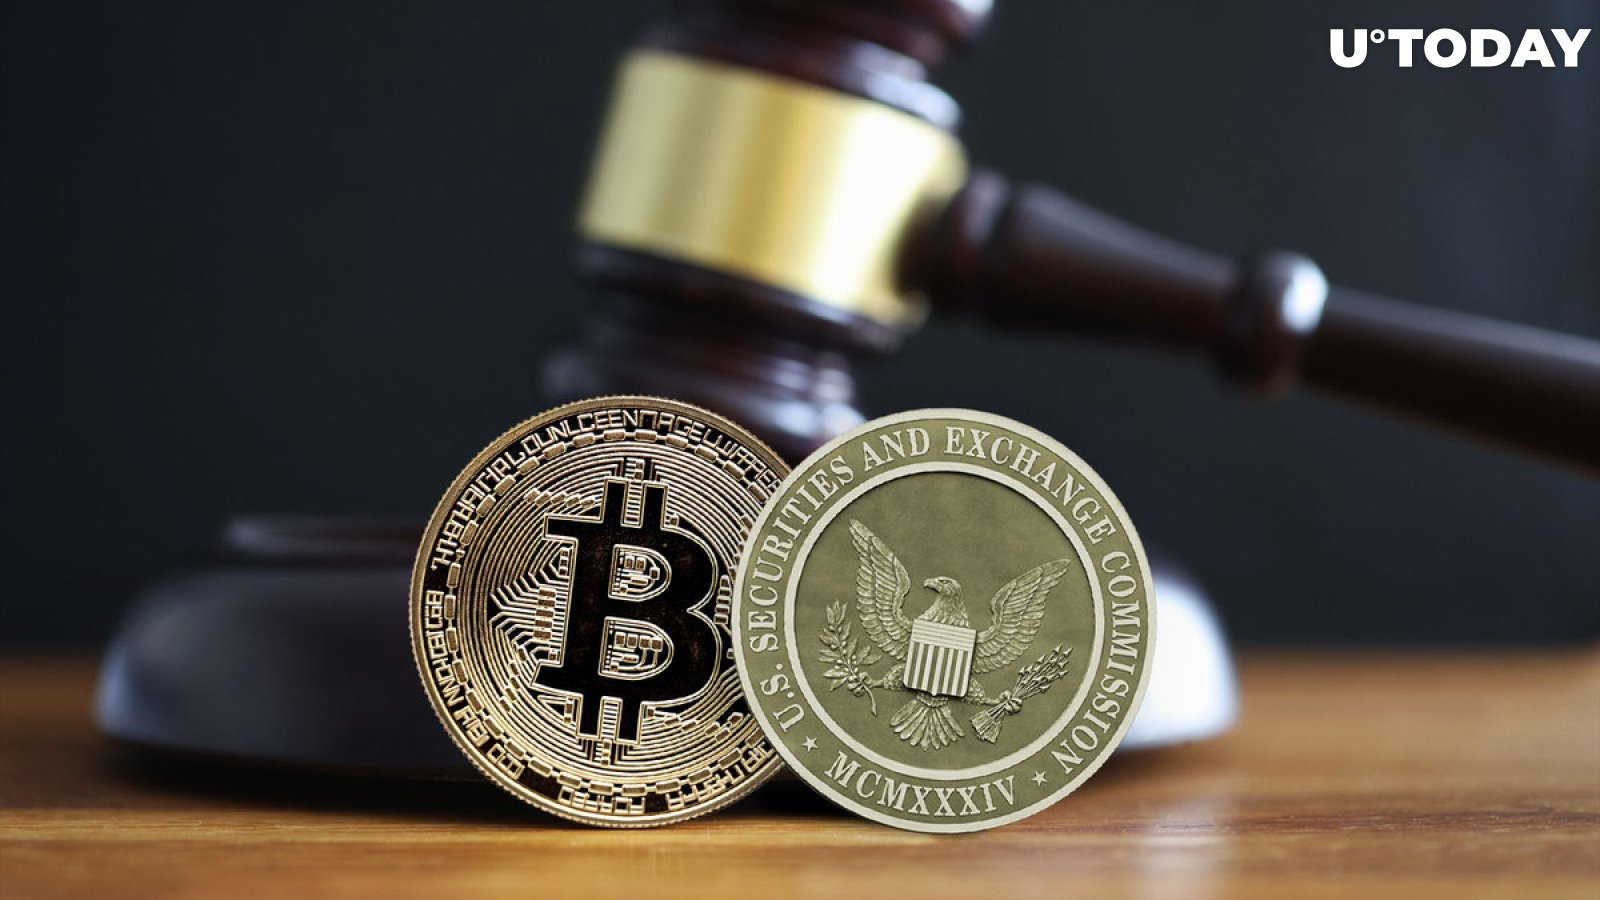 Bitcoin ETF Approval: SEC Signals Green Light by January 10, According to FOX